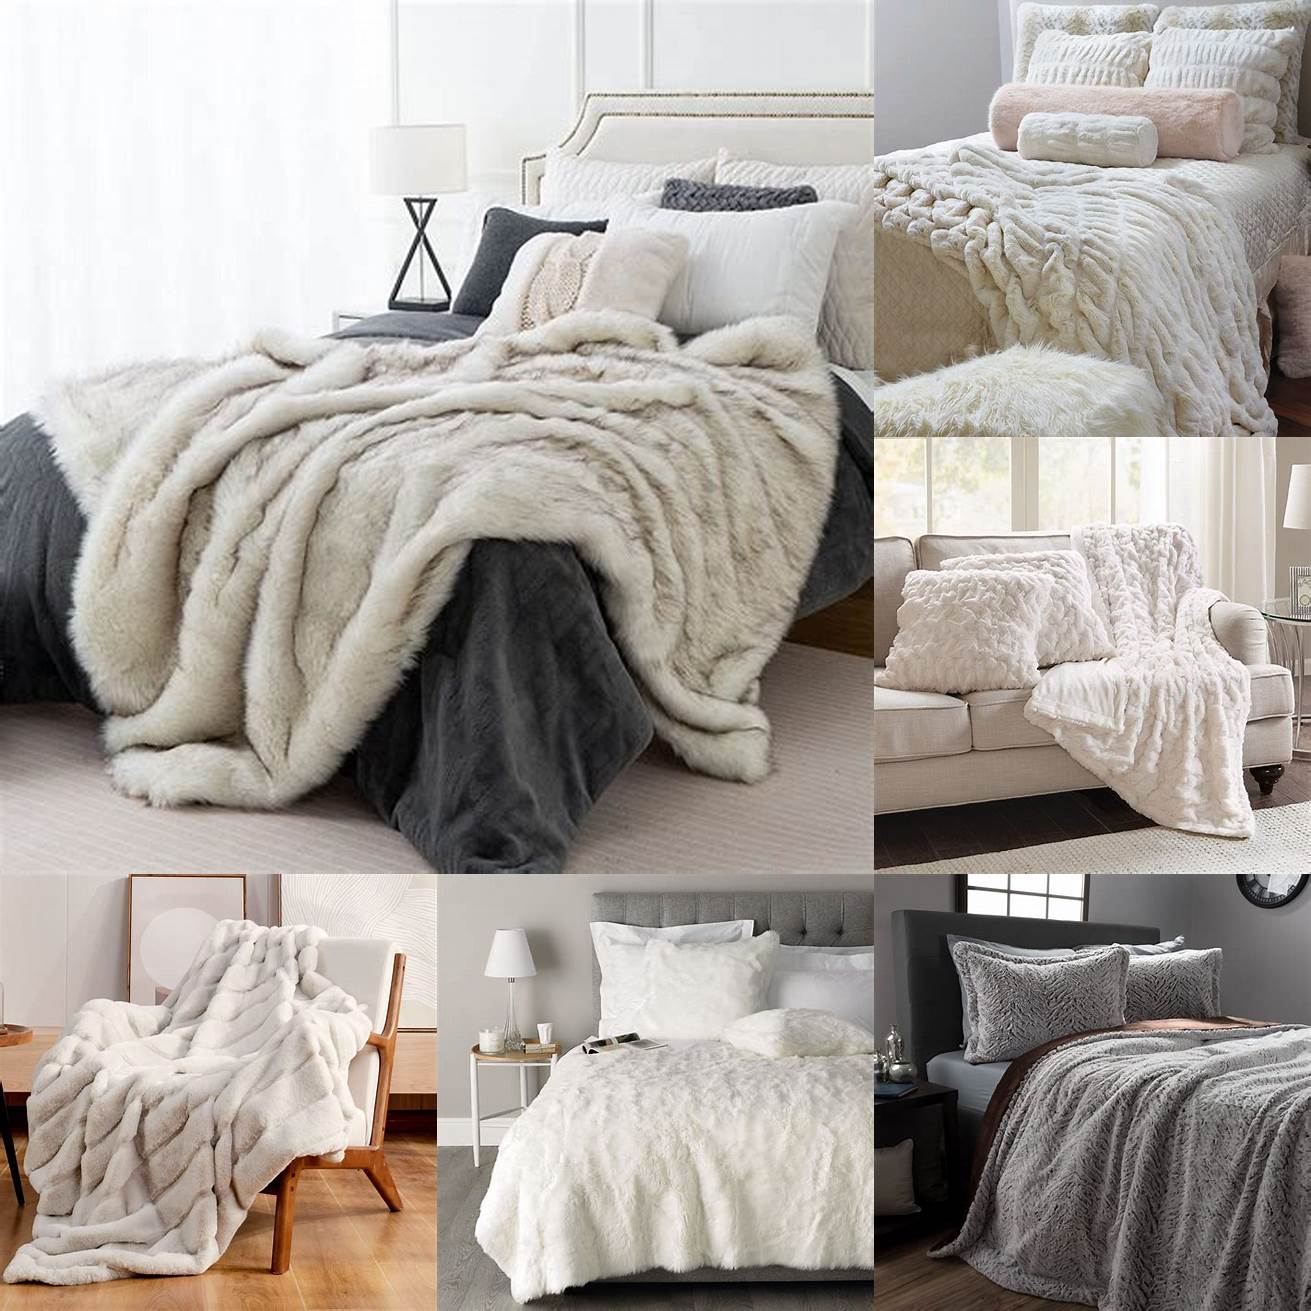 This cozy floor bed features a faux fur throw and a variety of textured pillows